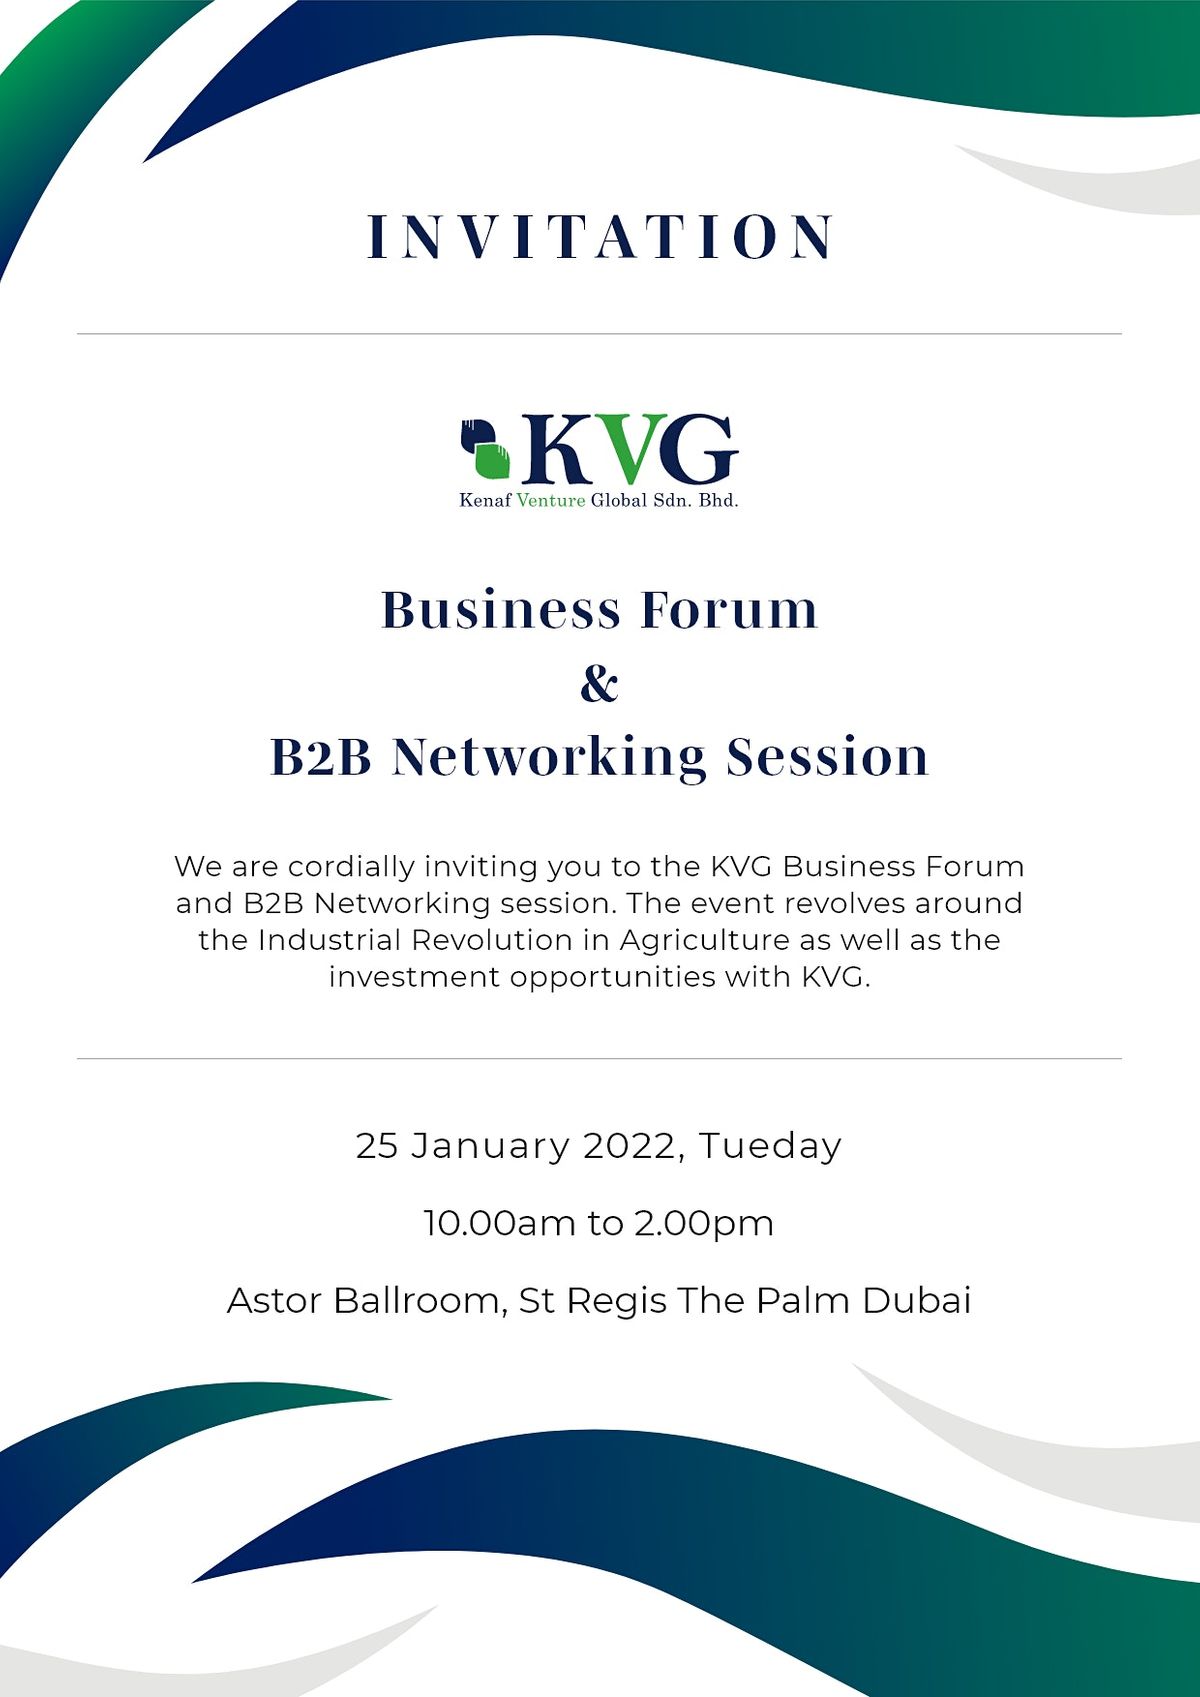 Business Forum & B2B Networking Session